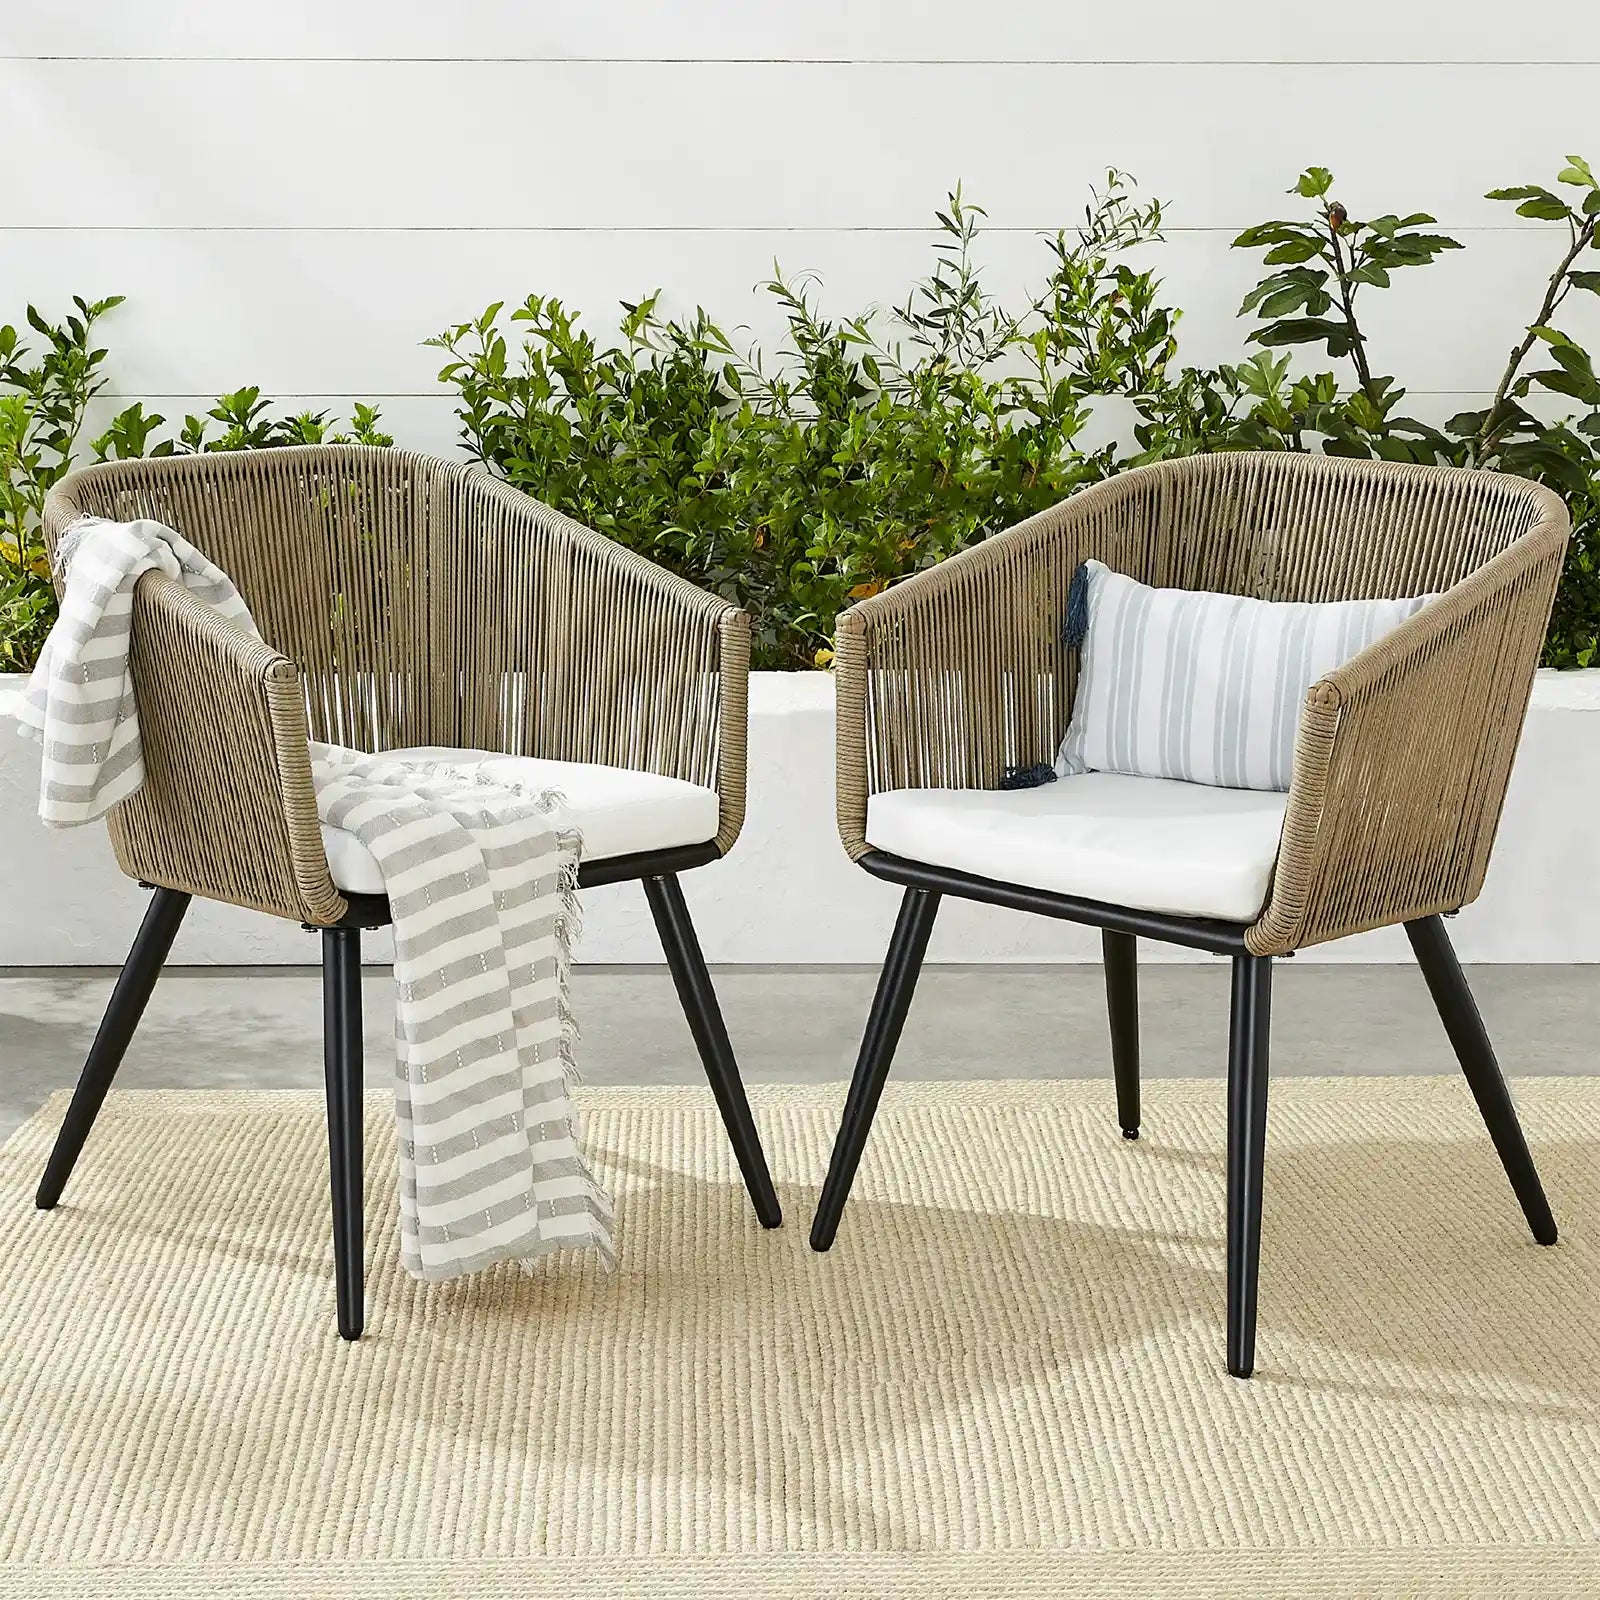 Set of 2 Indoor Outdoor Patio Dining Chairs Woven Wicker Seating Set 250lb Capacity